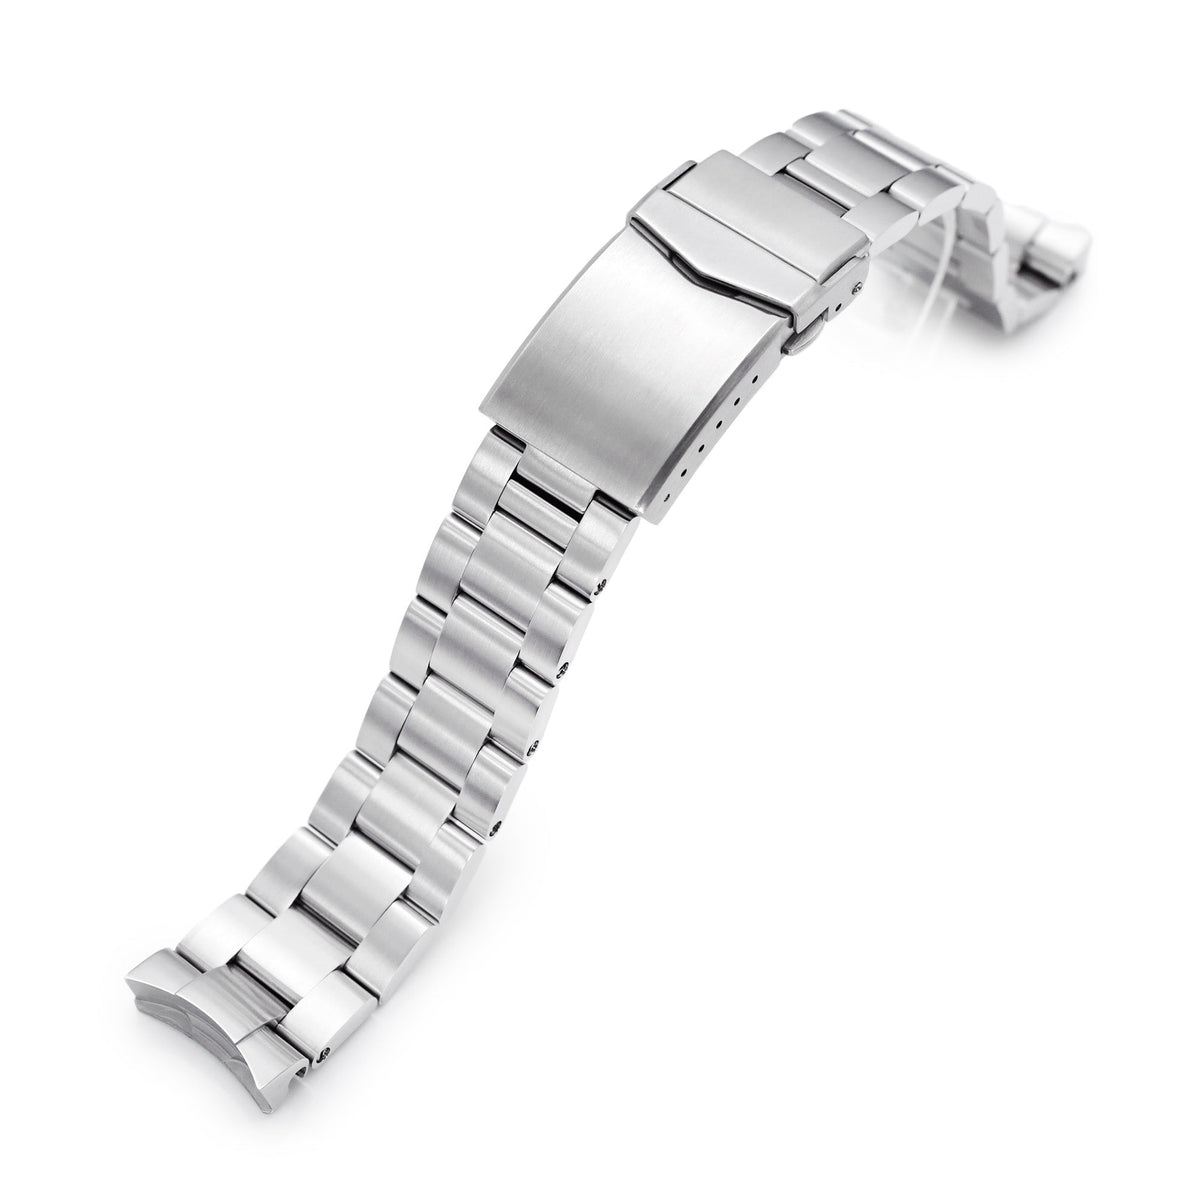 20mm Super Boyer Watch Band for Seiko 5 Sports 38mm SRPK, 316L Stainless Steel Brushed V-Clasp Strapcode Watch Bands